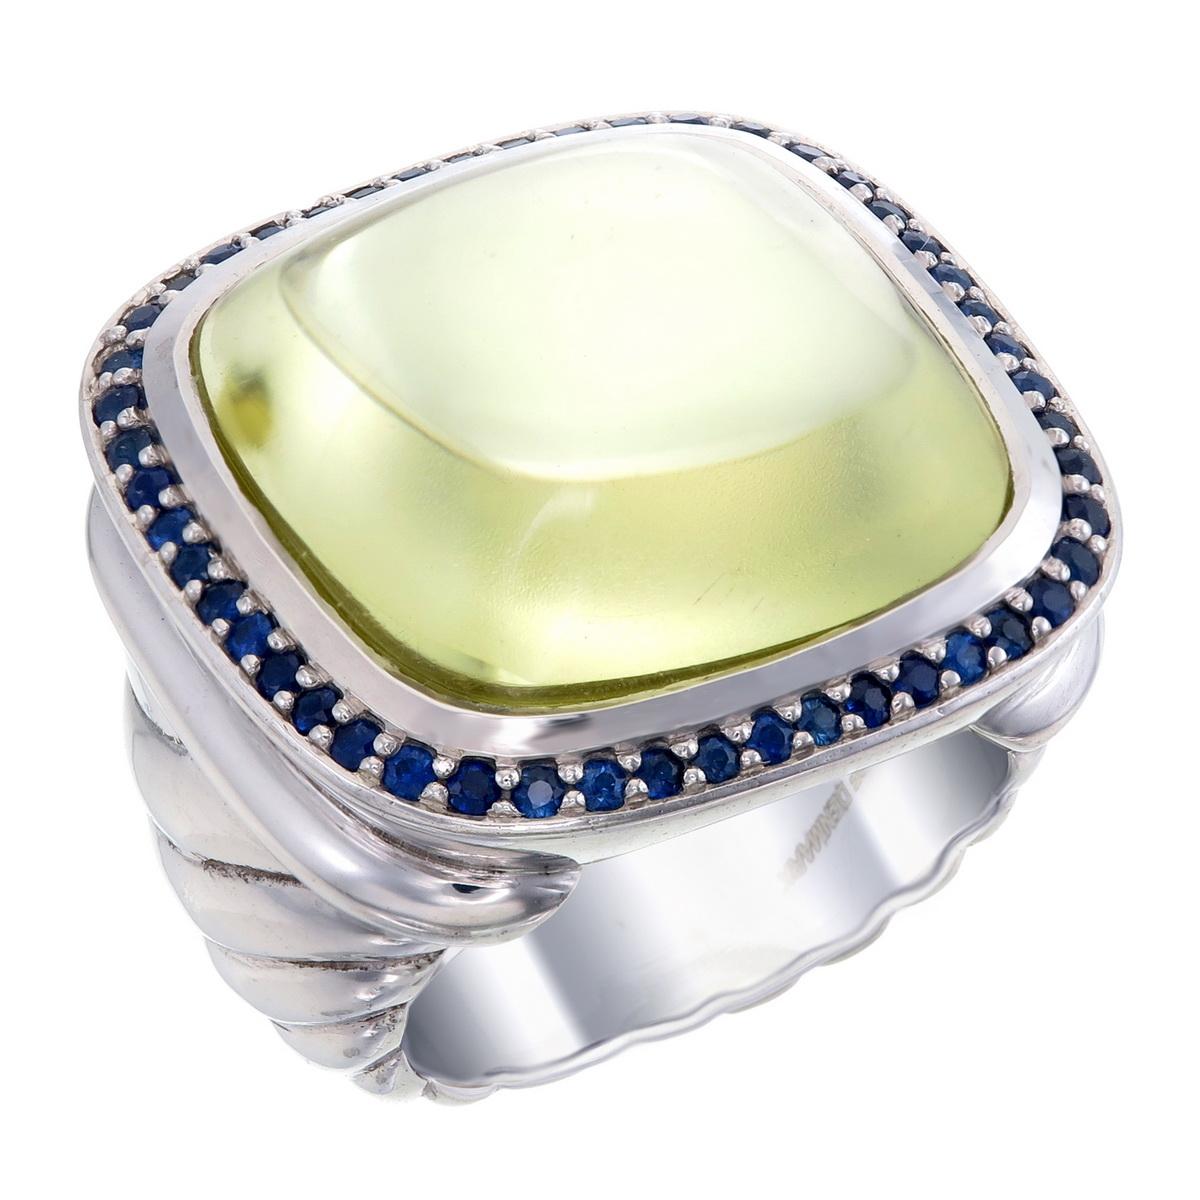 Orloff of Denmark; Sterling Silver Statement Ring set with a huge Lemon Quartz surrounded by a total of 0.50 carats of Blue Sapphires.

Introducing a captivating 925 silver statement ring that's sure to turn heads. 
This ring showcases a wide and